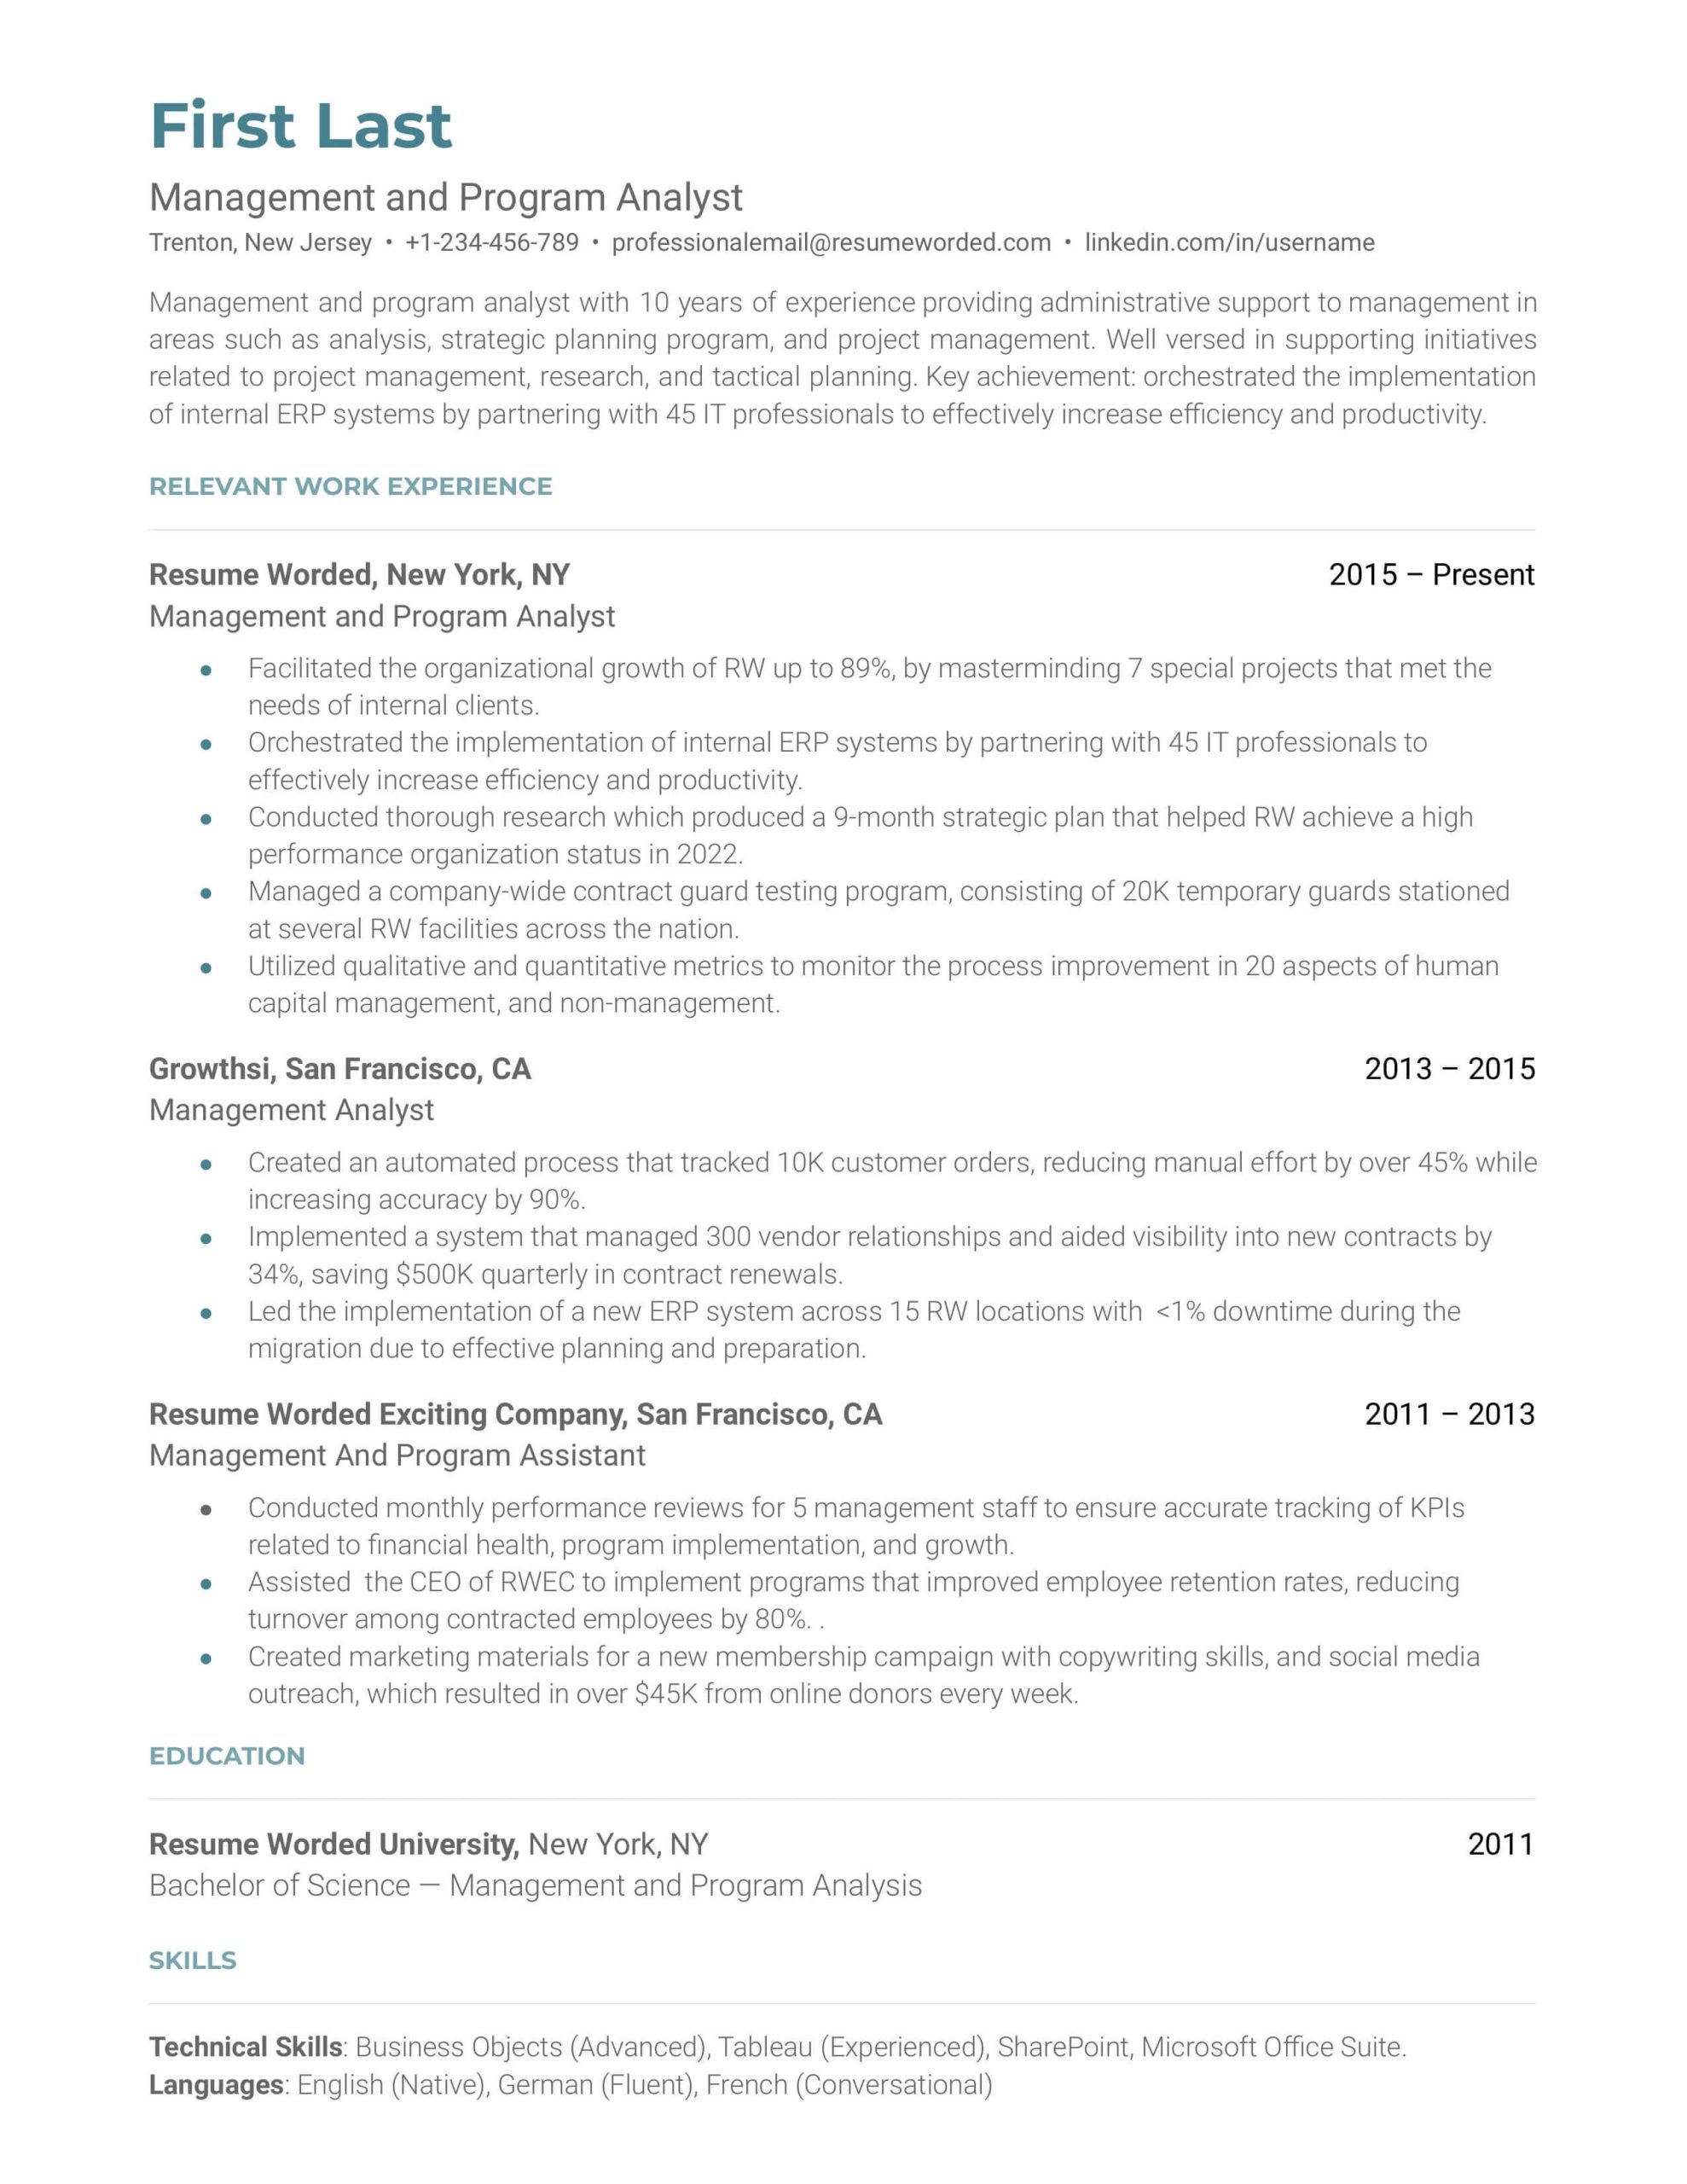 Sas Administrator Grid Experience Resumes Sample Resume Examples for 2022 [handpicked by Recruiters] Resume Worded